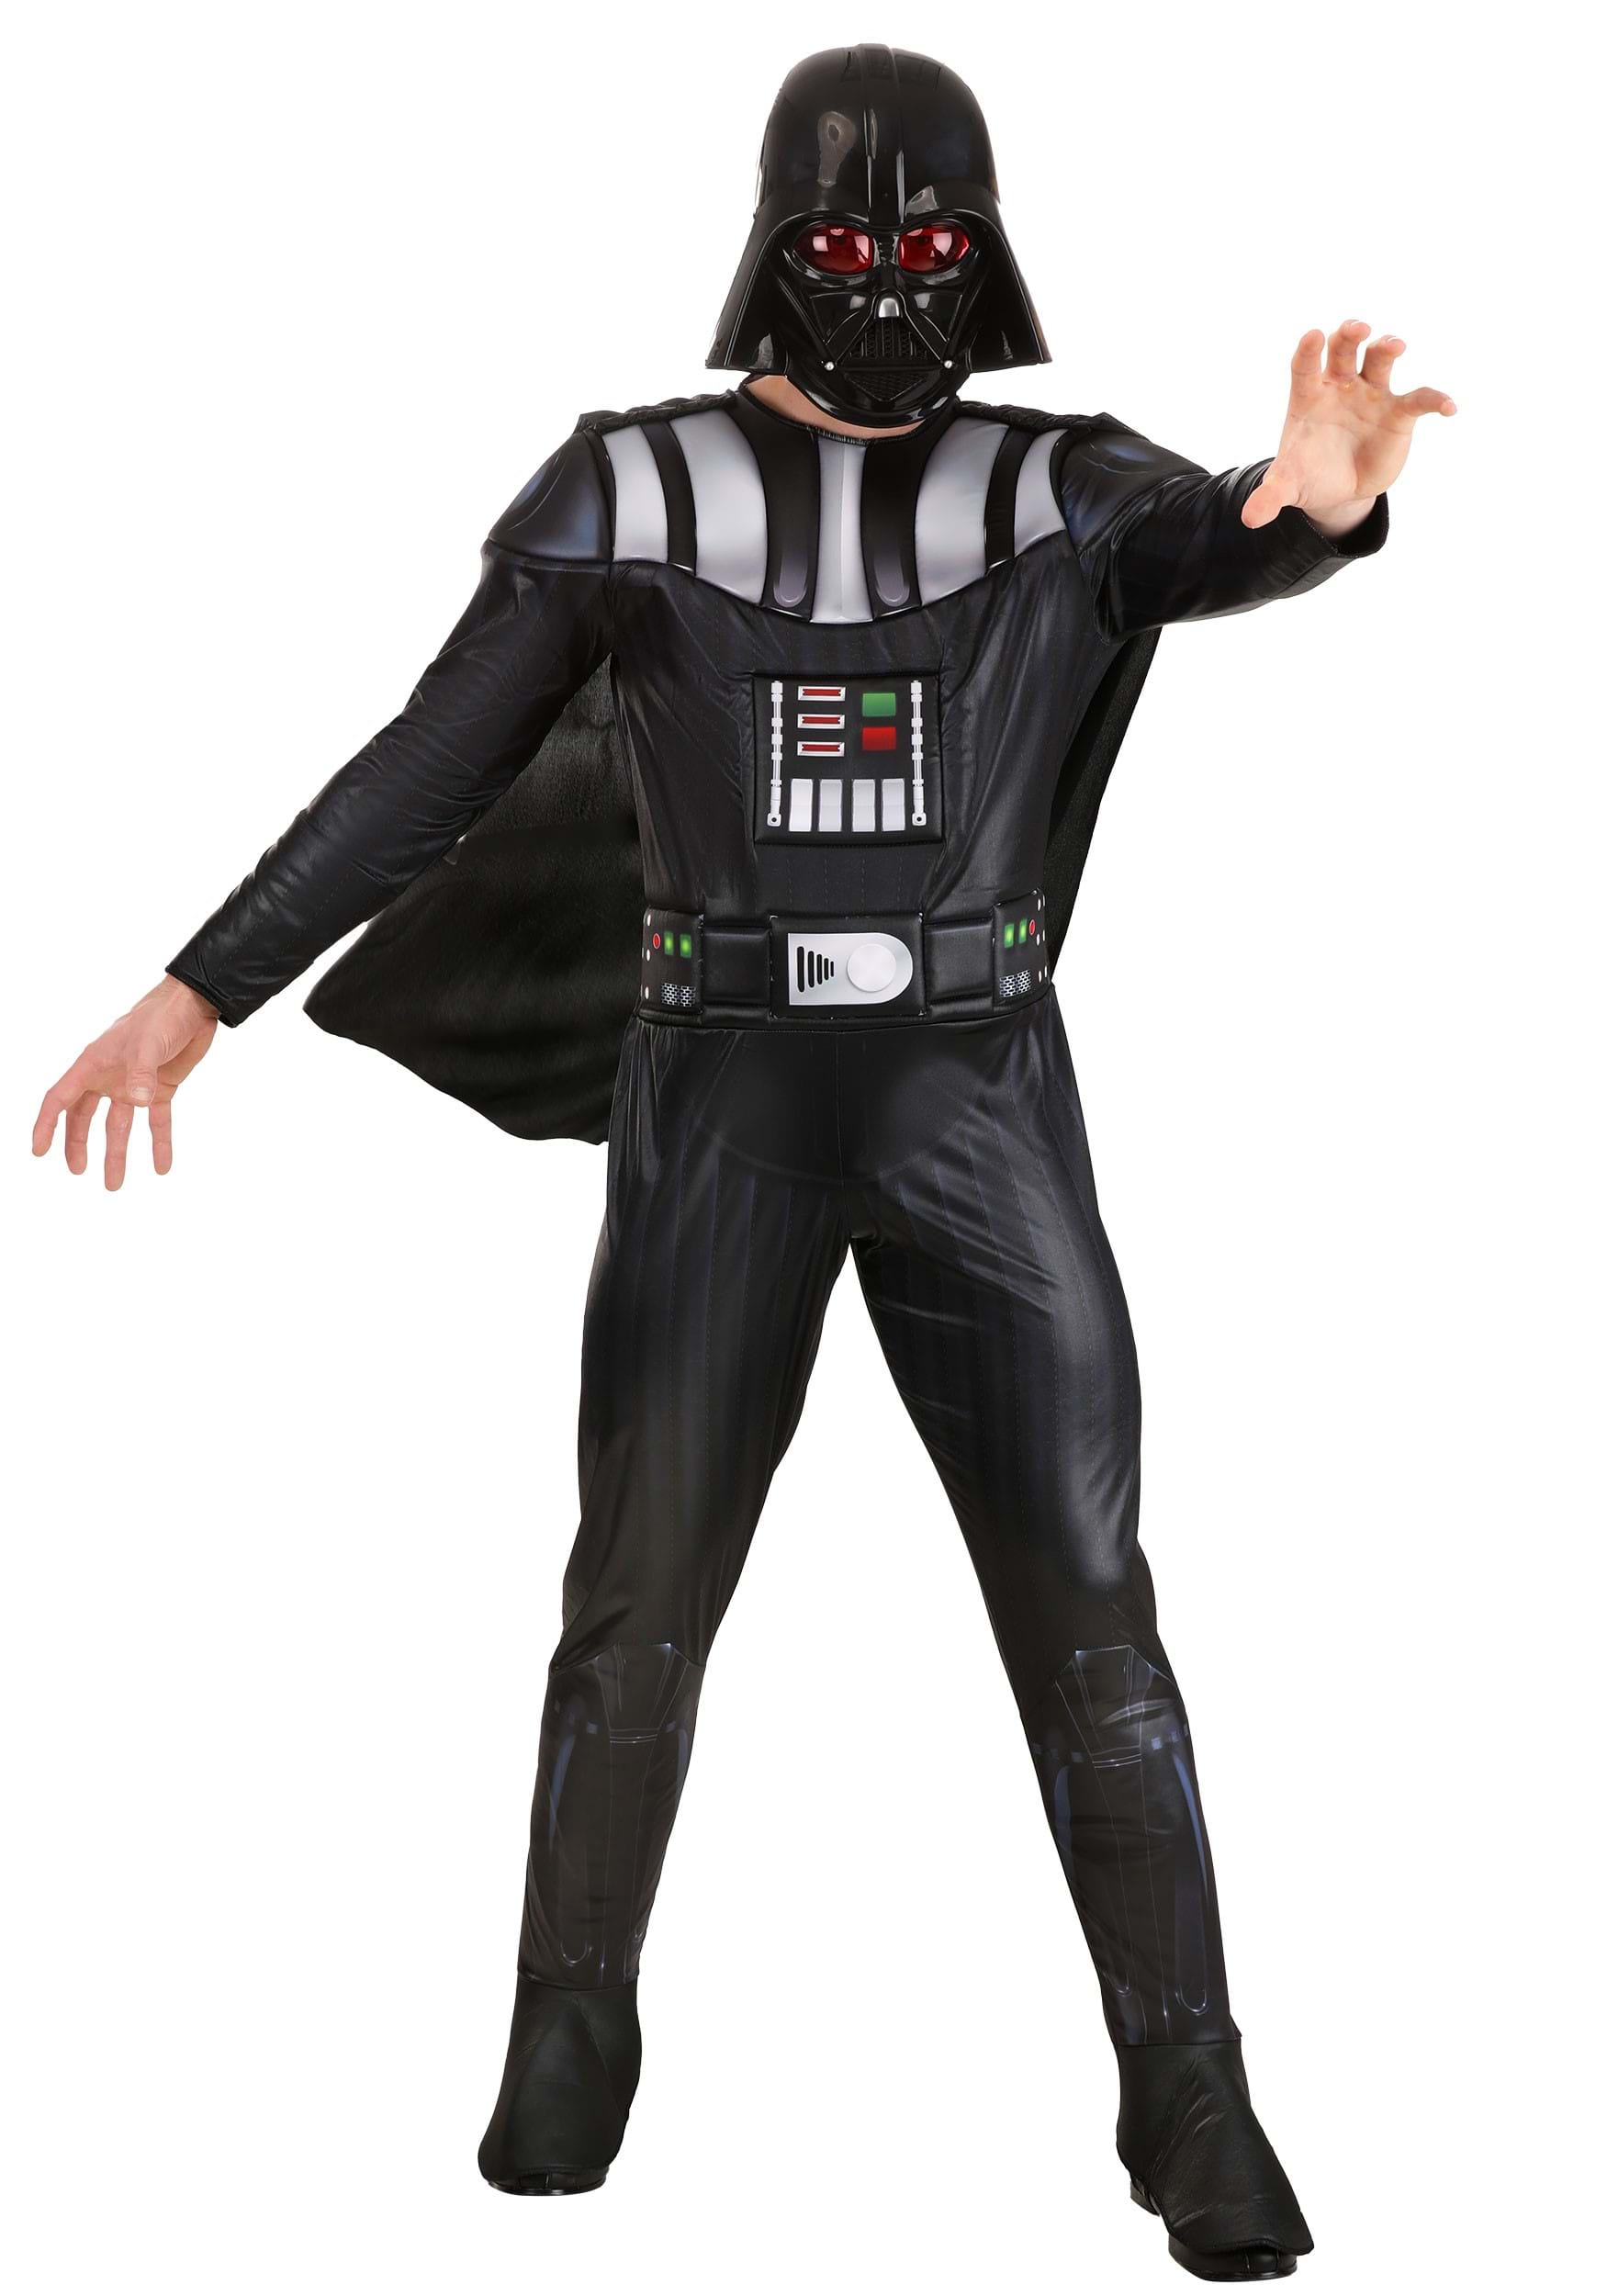 Image of Exclusive Darth Vader Adult Costume ID JWC0995-2X